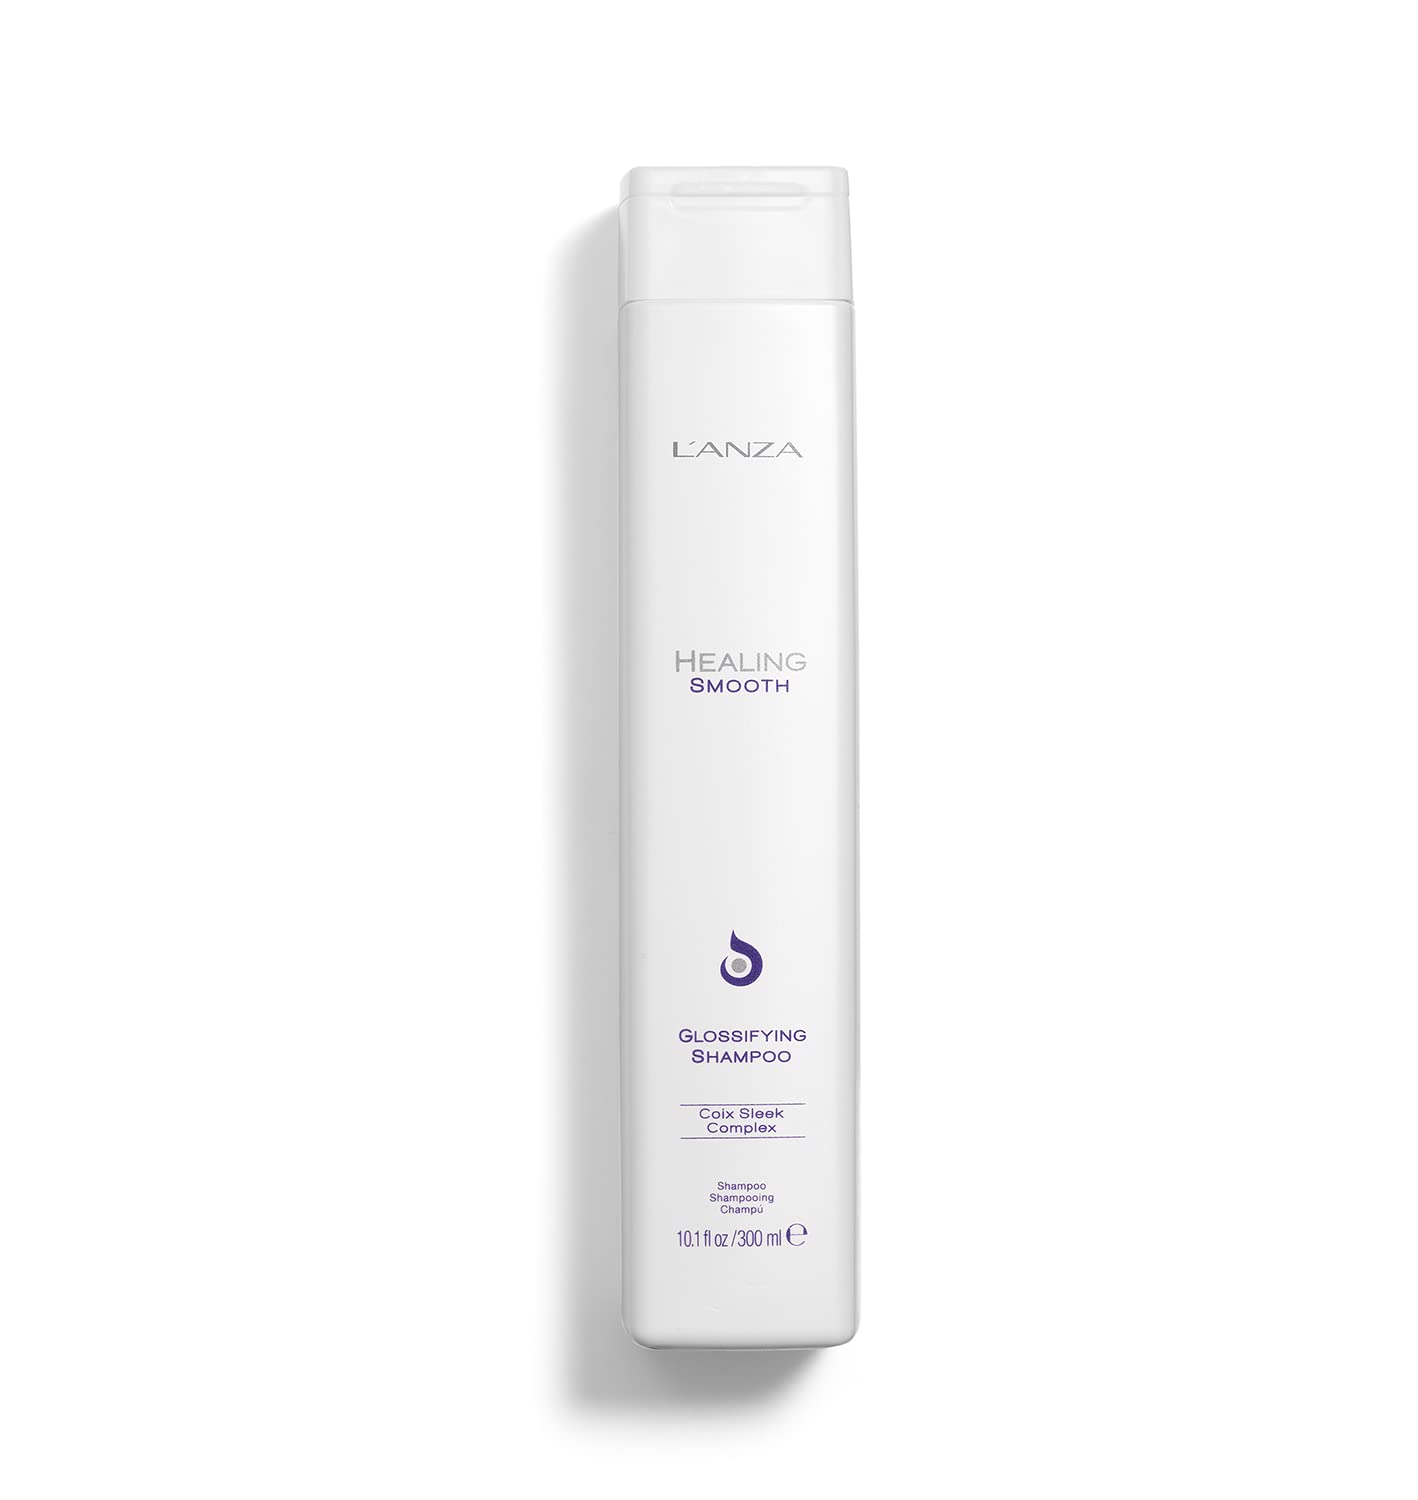 L'ANZA Healing Smooth Glossifying Shampoo, Nourishes, Repairs, and Boosts Hair Shine and Strength for a Perfect Silky-Smooth, Frizz-free Look (33.8 Fl Oz)